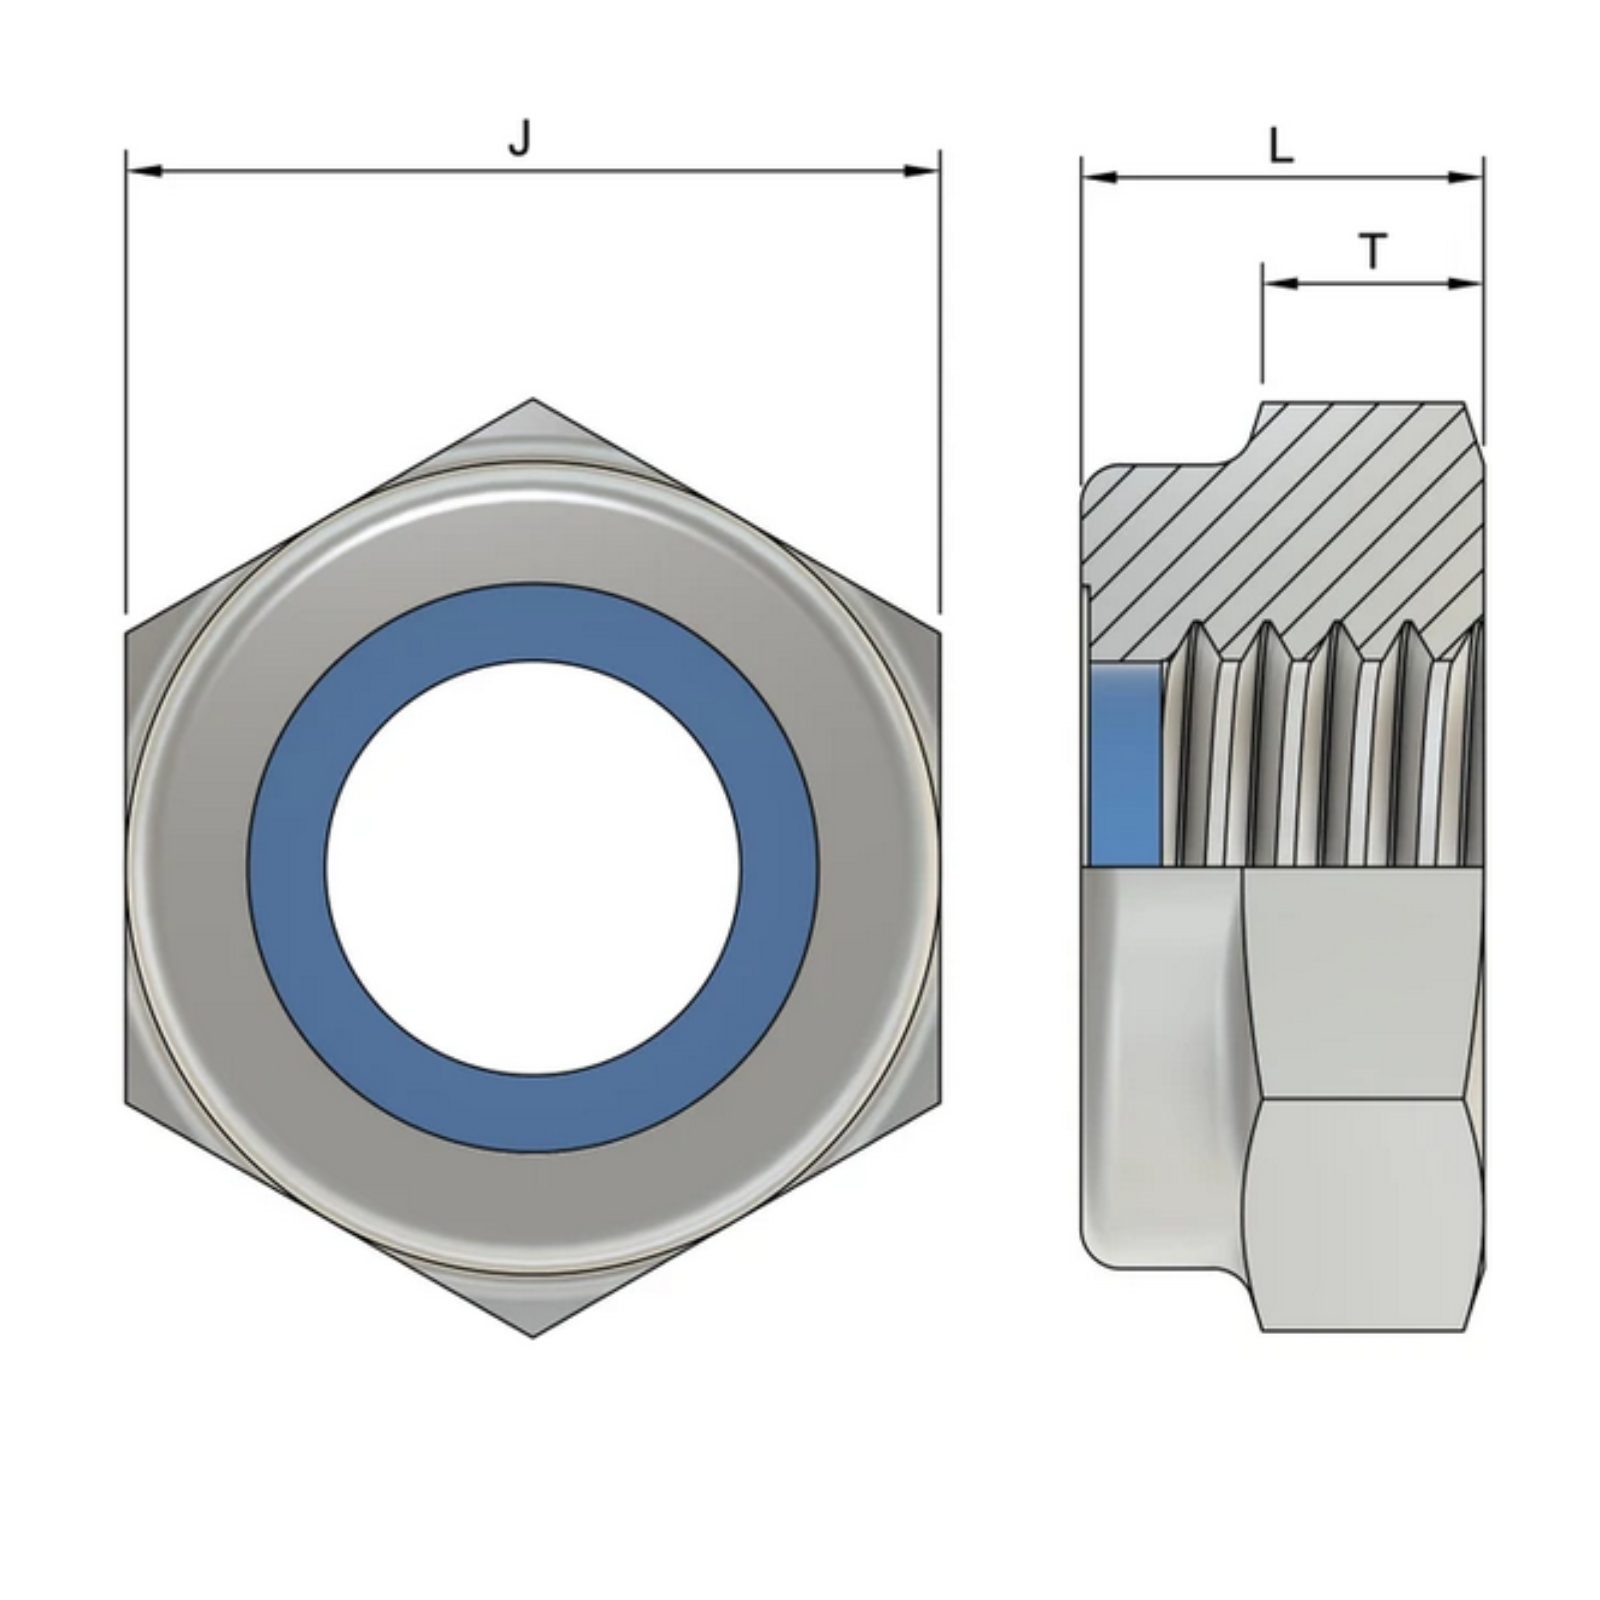 M14 Hexagon Nylon Locking Nuts (DIN 985) - Stainless Steel (A2)